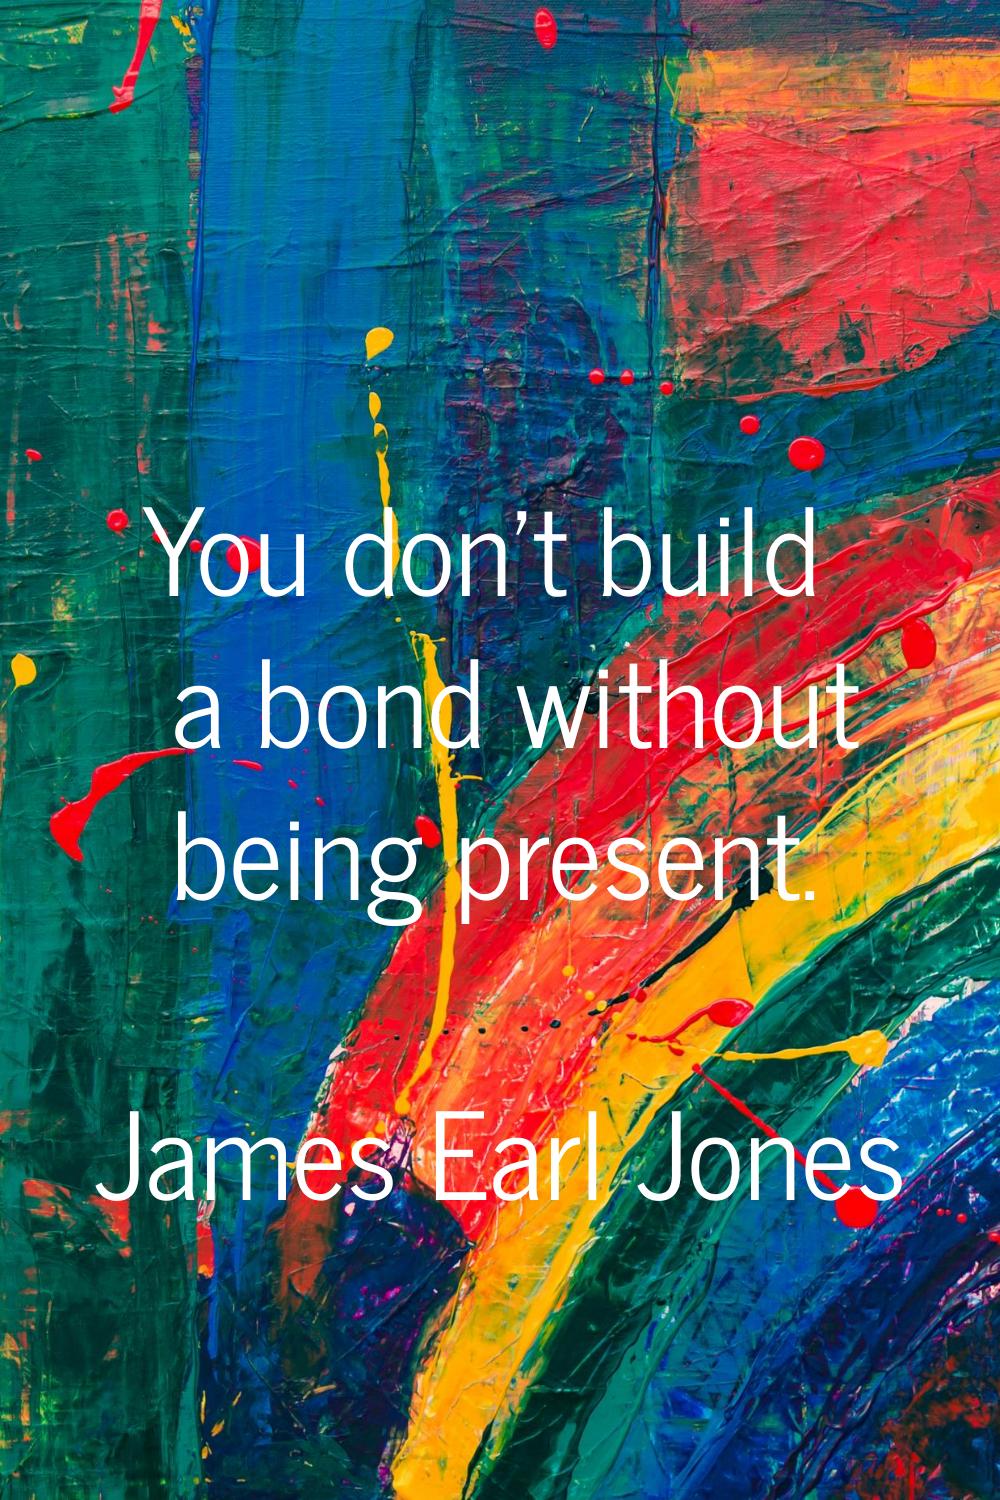 You don't build a bond without being present.